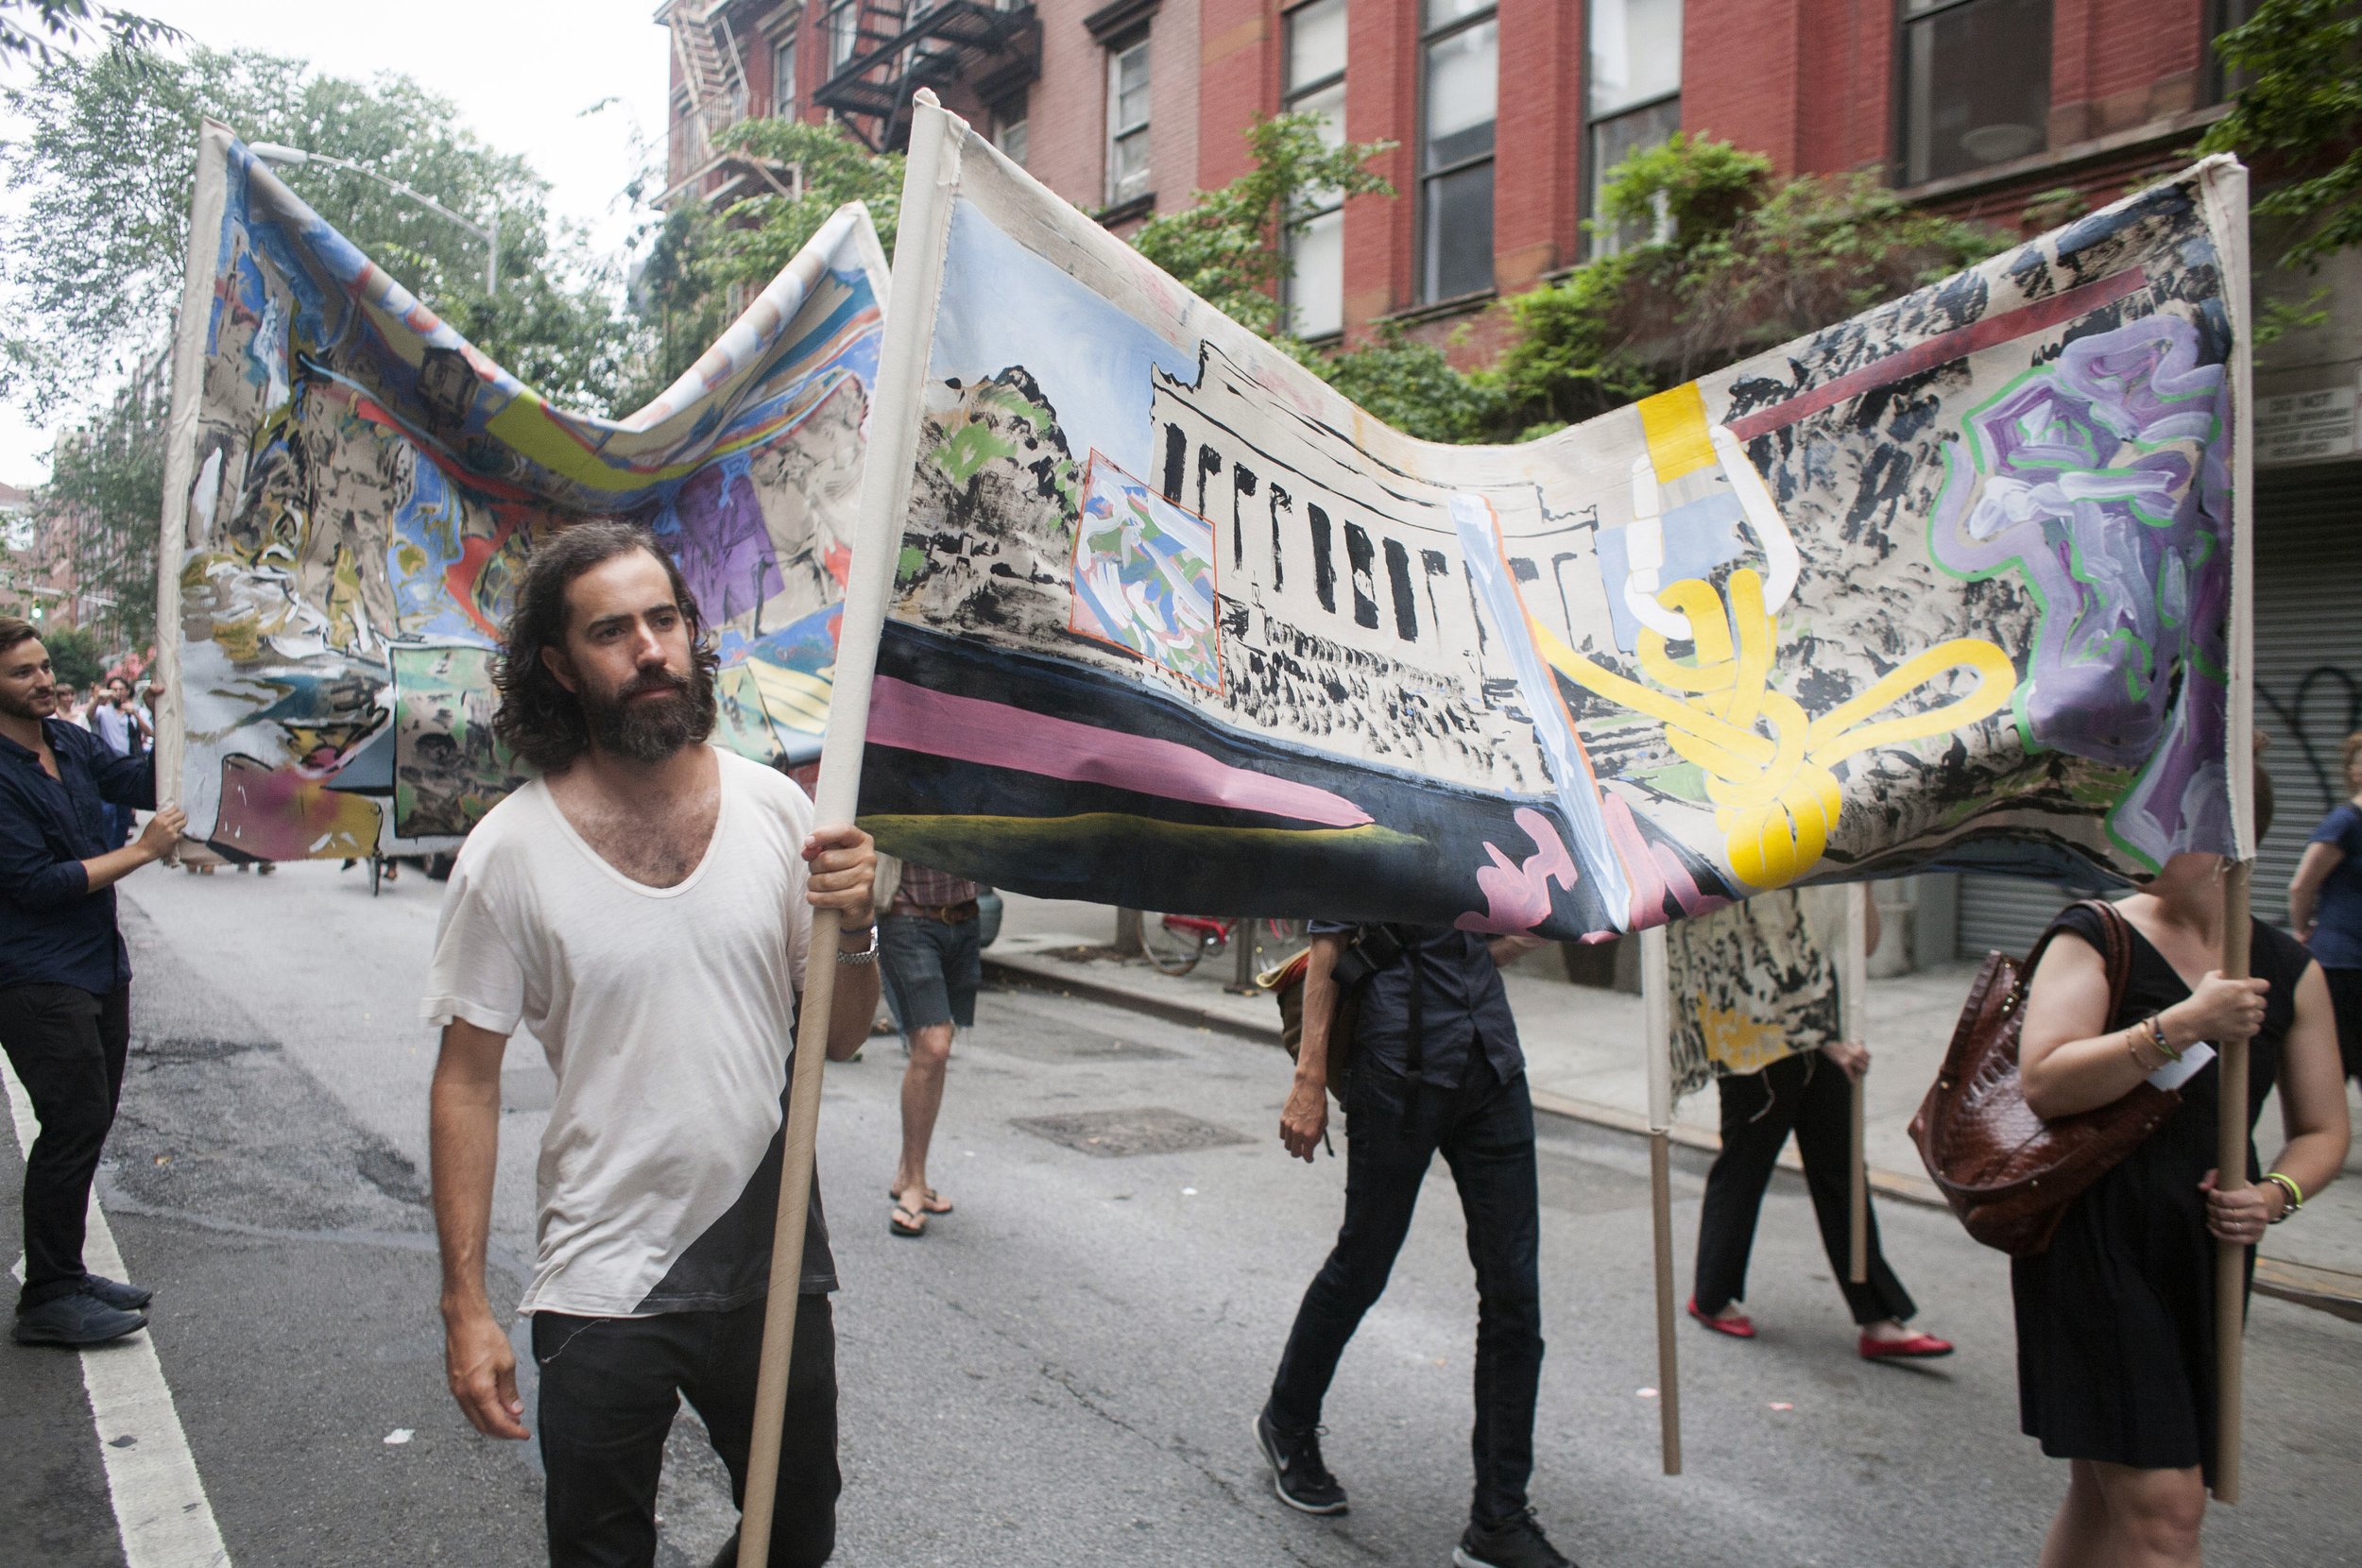  Paul Jacobson and participants carrying banner paintings by Keil Borrman 